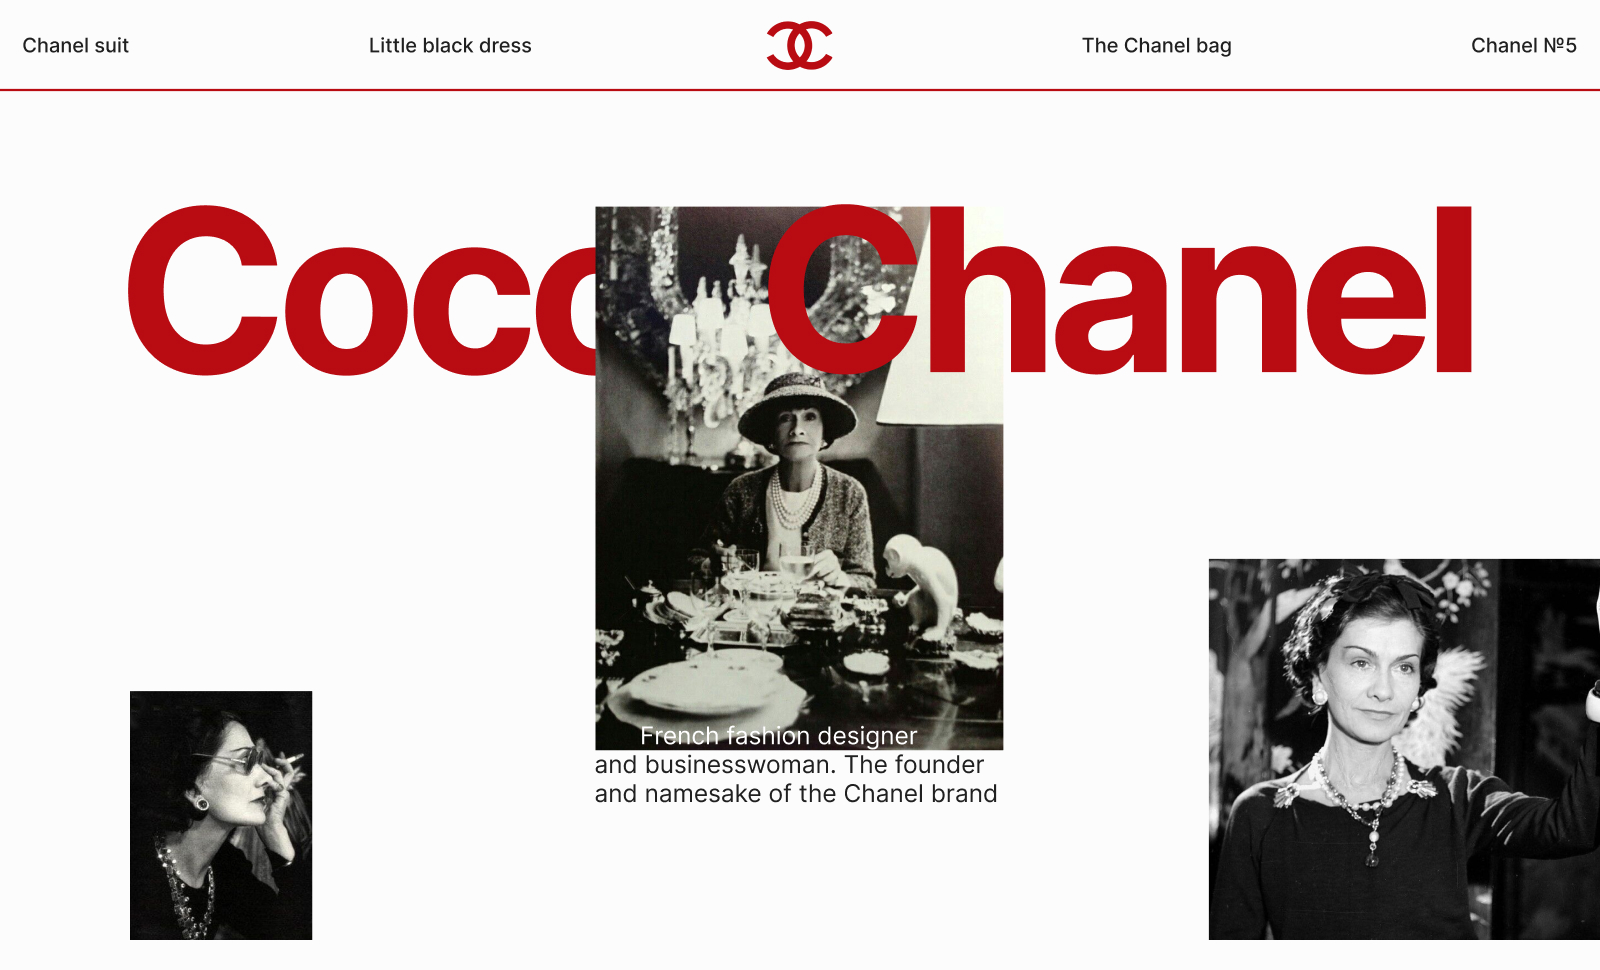 Coco Chanel Life and legacy